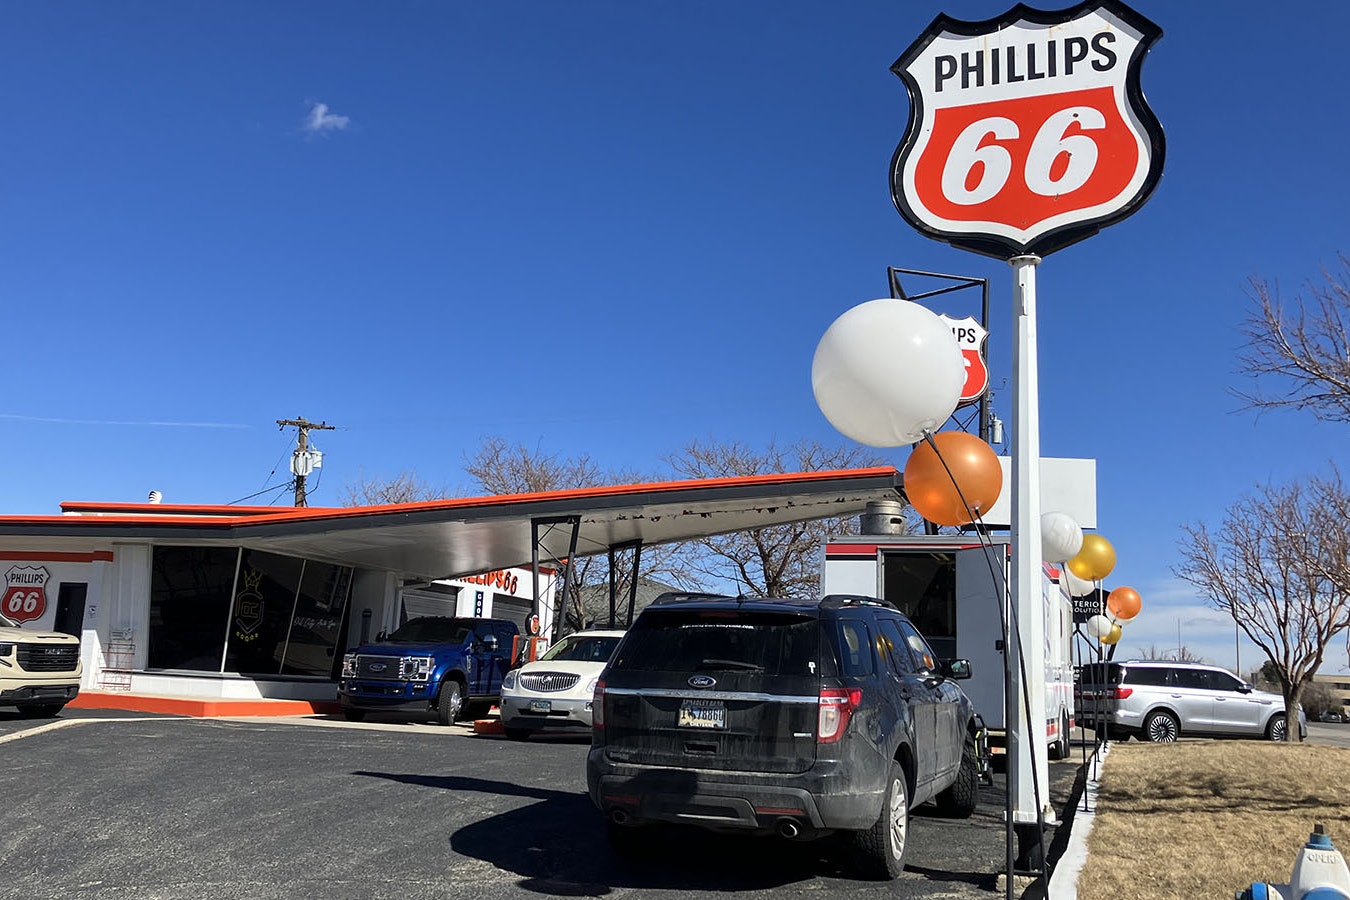 What looks like a Phillips 66 station in Casper is actually a salute to the 1960s. The building houses an auto detailing business, and the lot hosts vehicles for sale and the food truck Gringos.